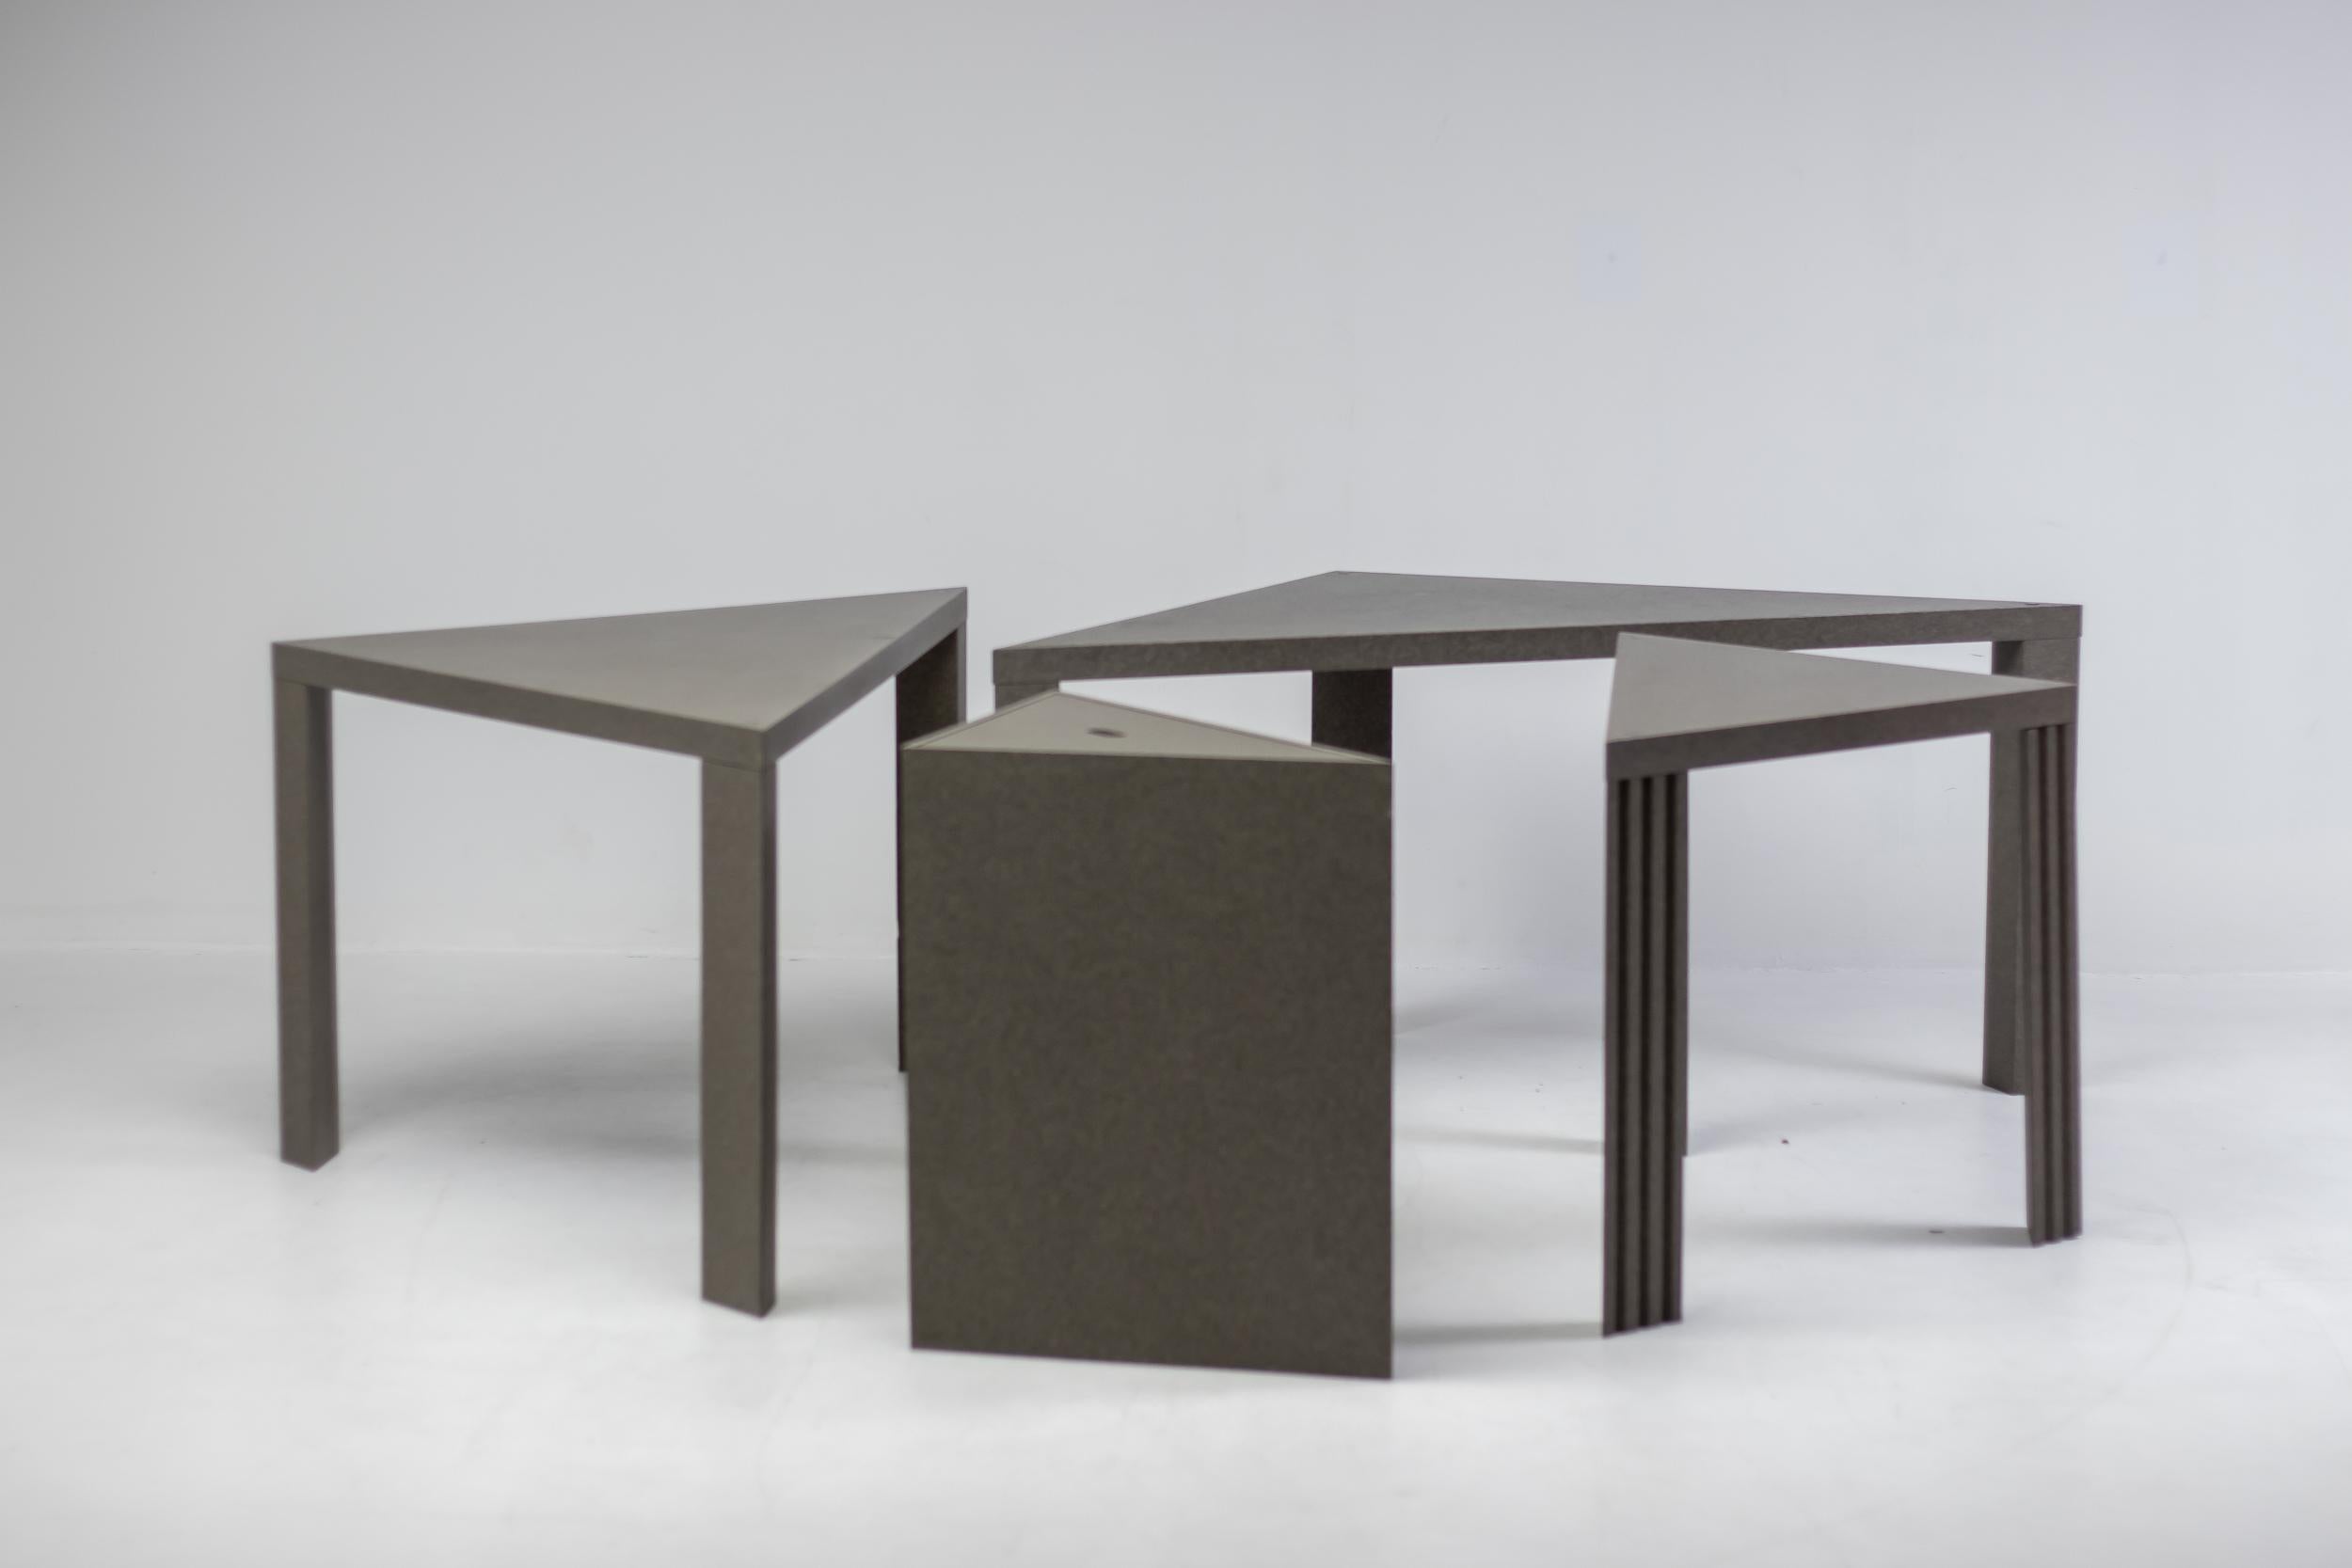 Massimo Morozzi for Cassina, ‘Tangram’ dining table, painted beech, Italy, 1983.
This design by Massimo Morozzi is modular and therefore versatile, playful in use and color, but still elegant. It is functional in the way that the triangular tables